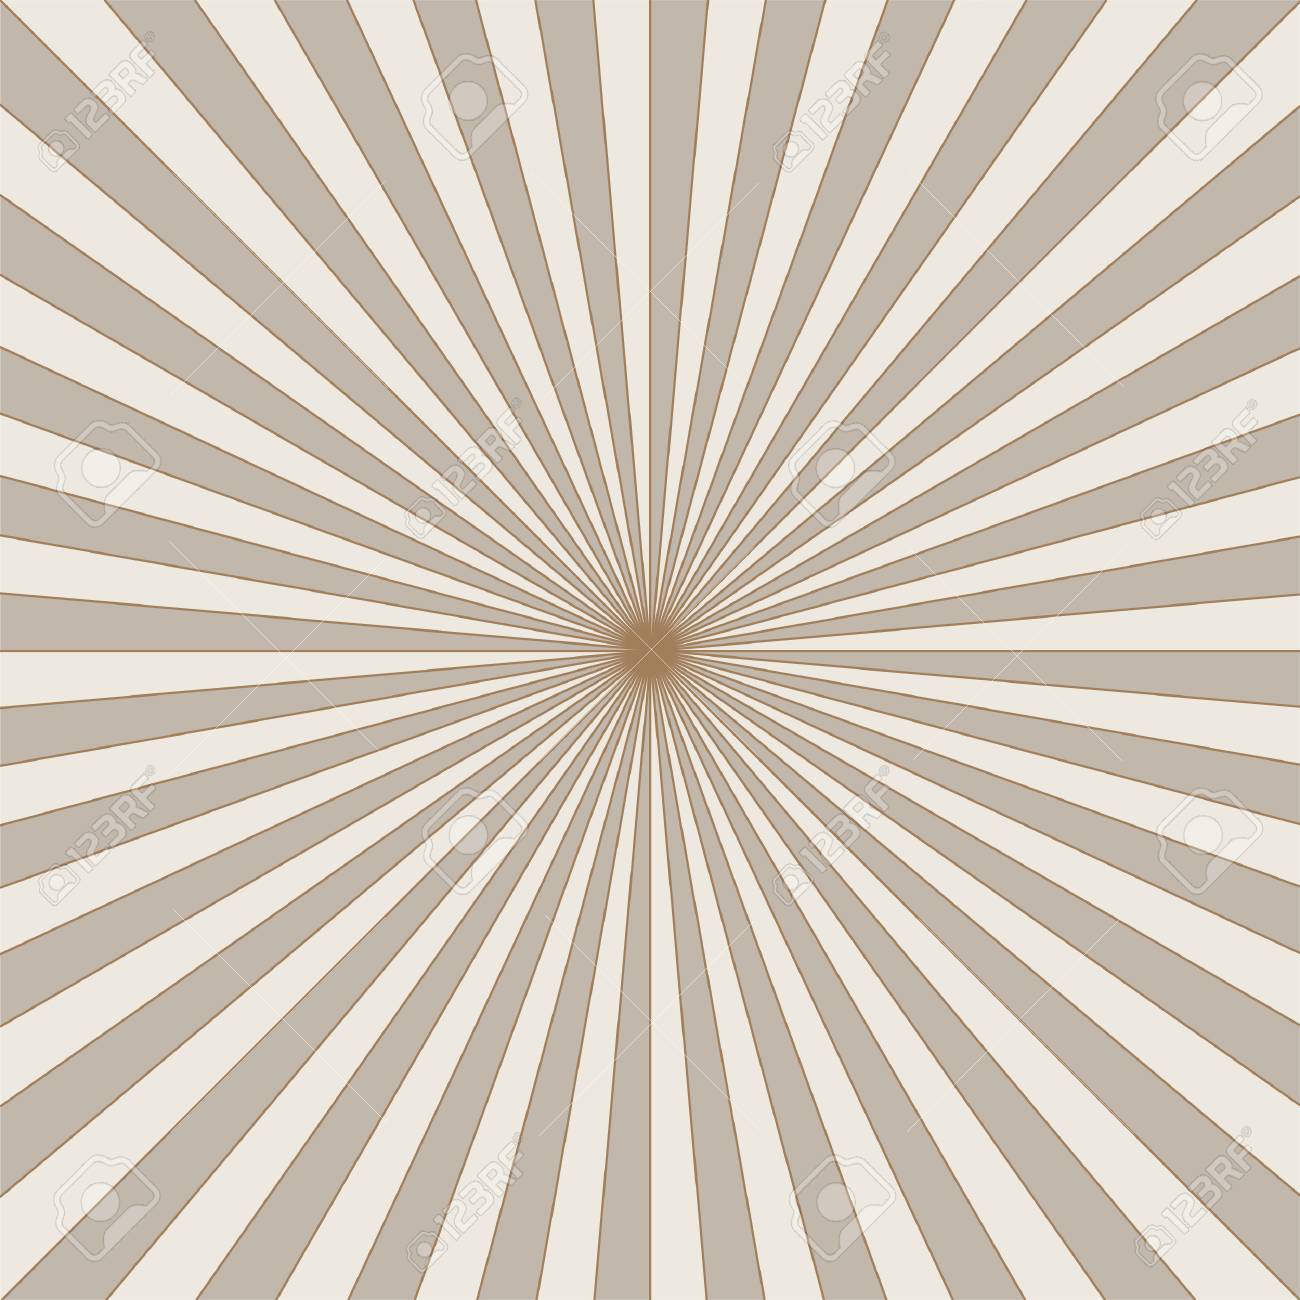 Striped Retro Background With Radiating Rays Burst Vector